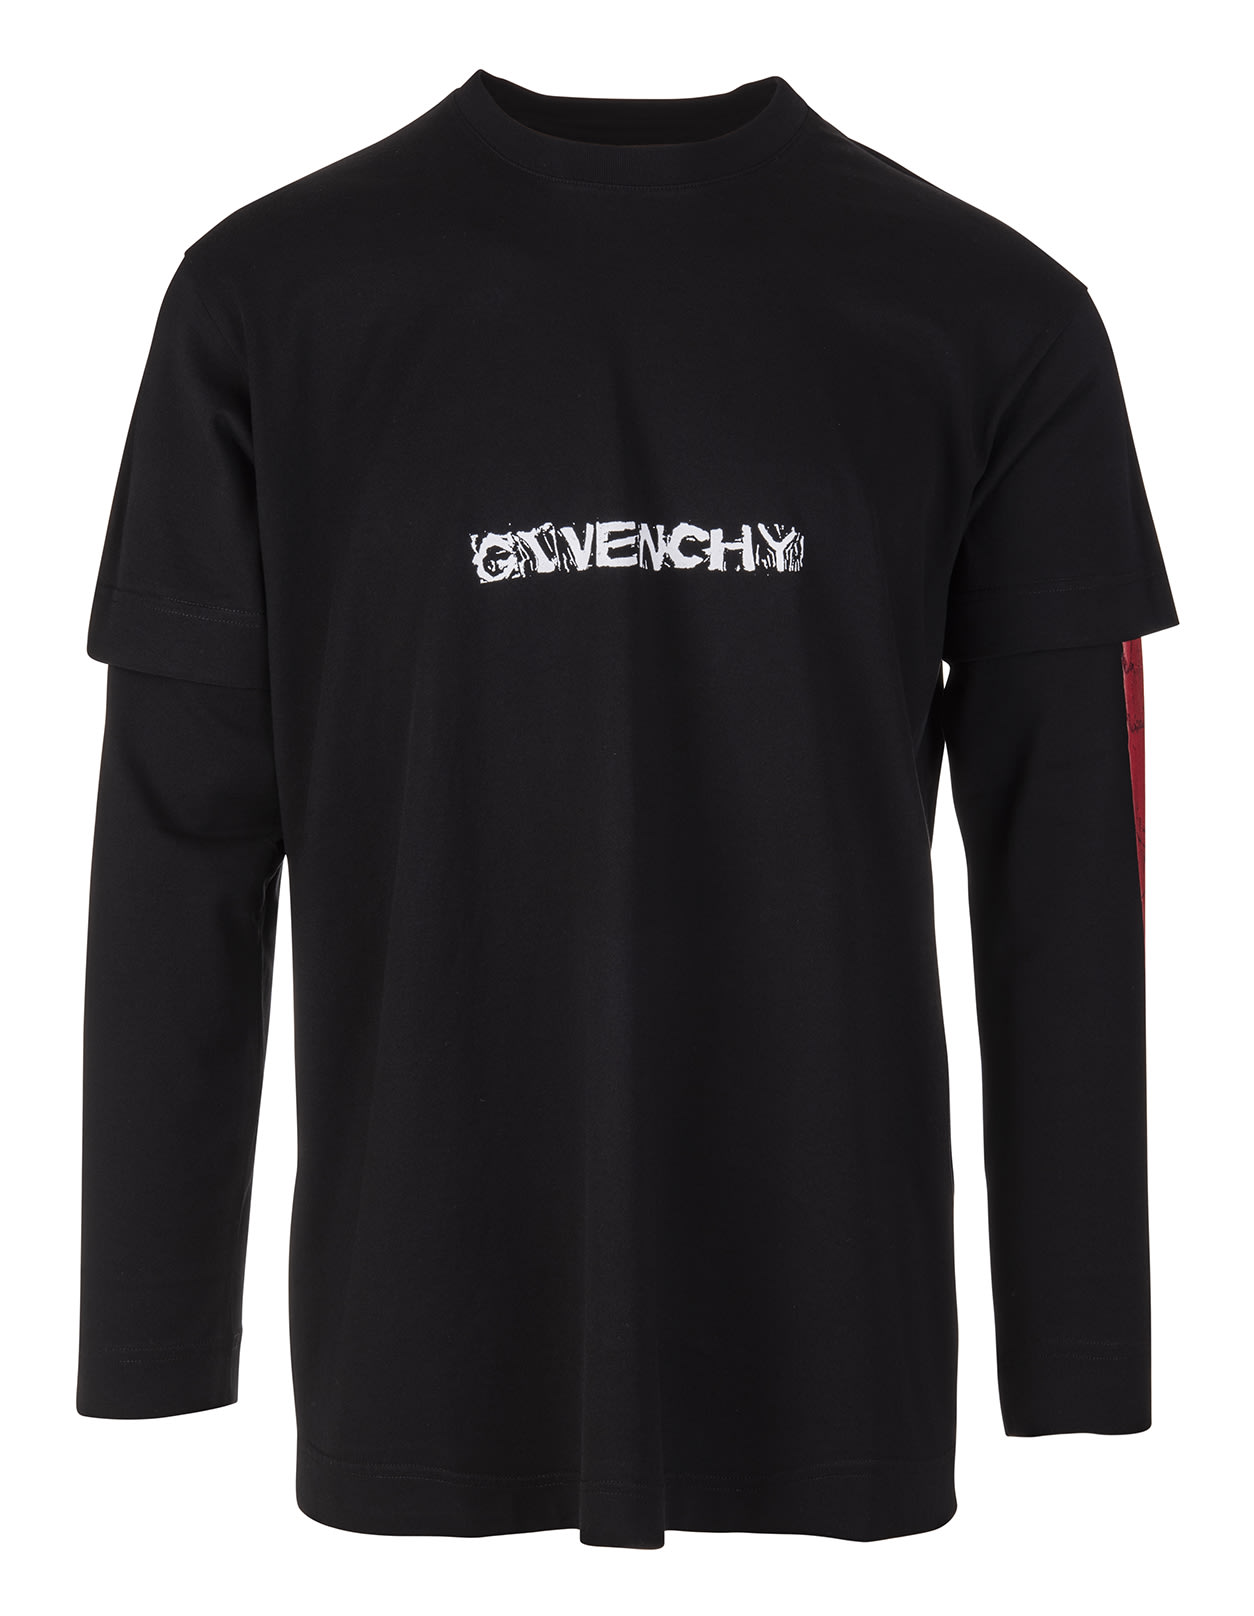 Man Black T-shirt With Overlay Effect And White Givenchy And Goth Prints